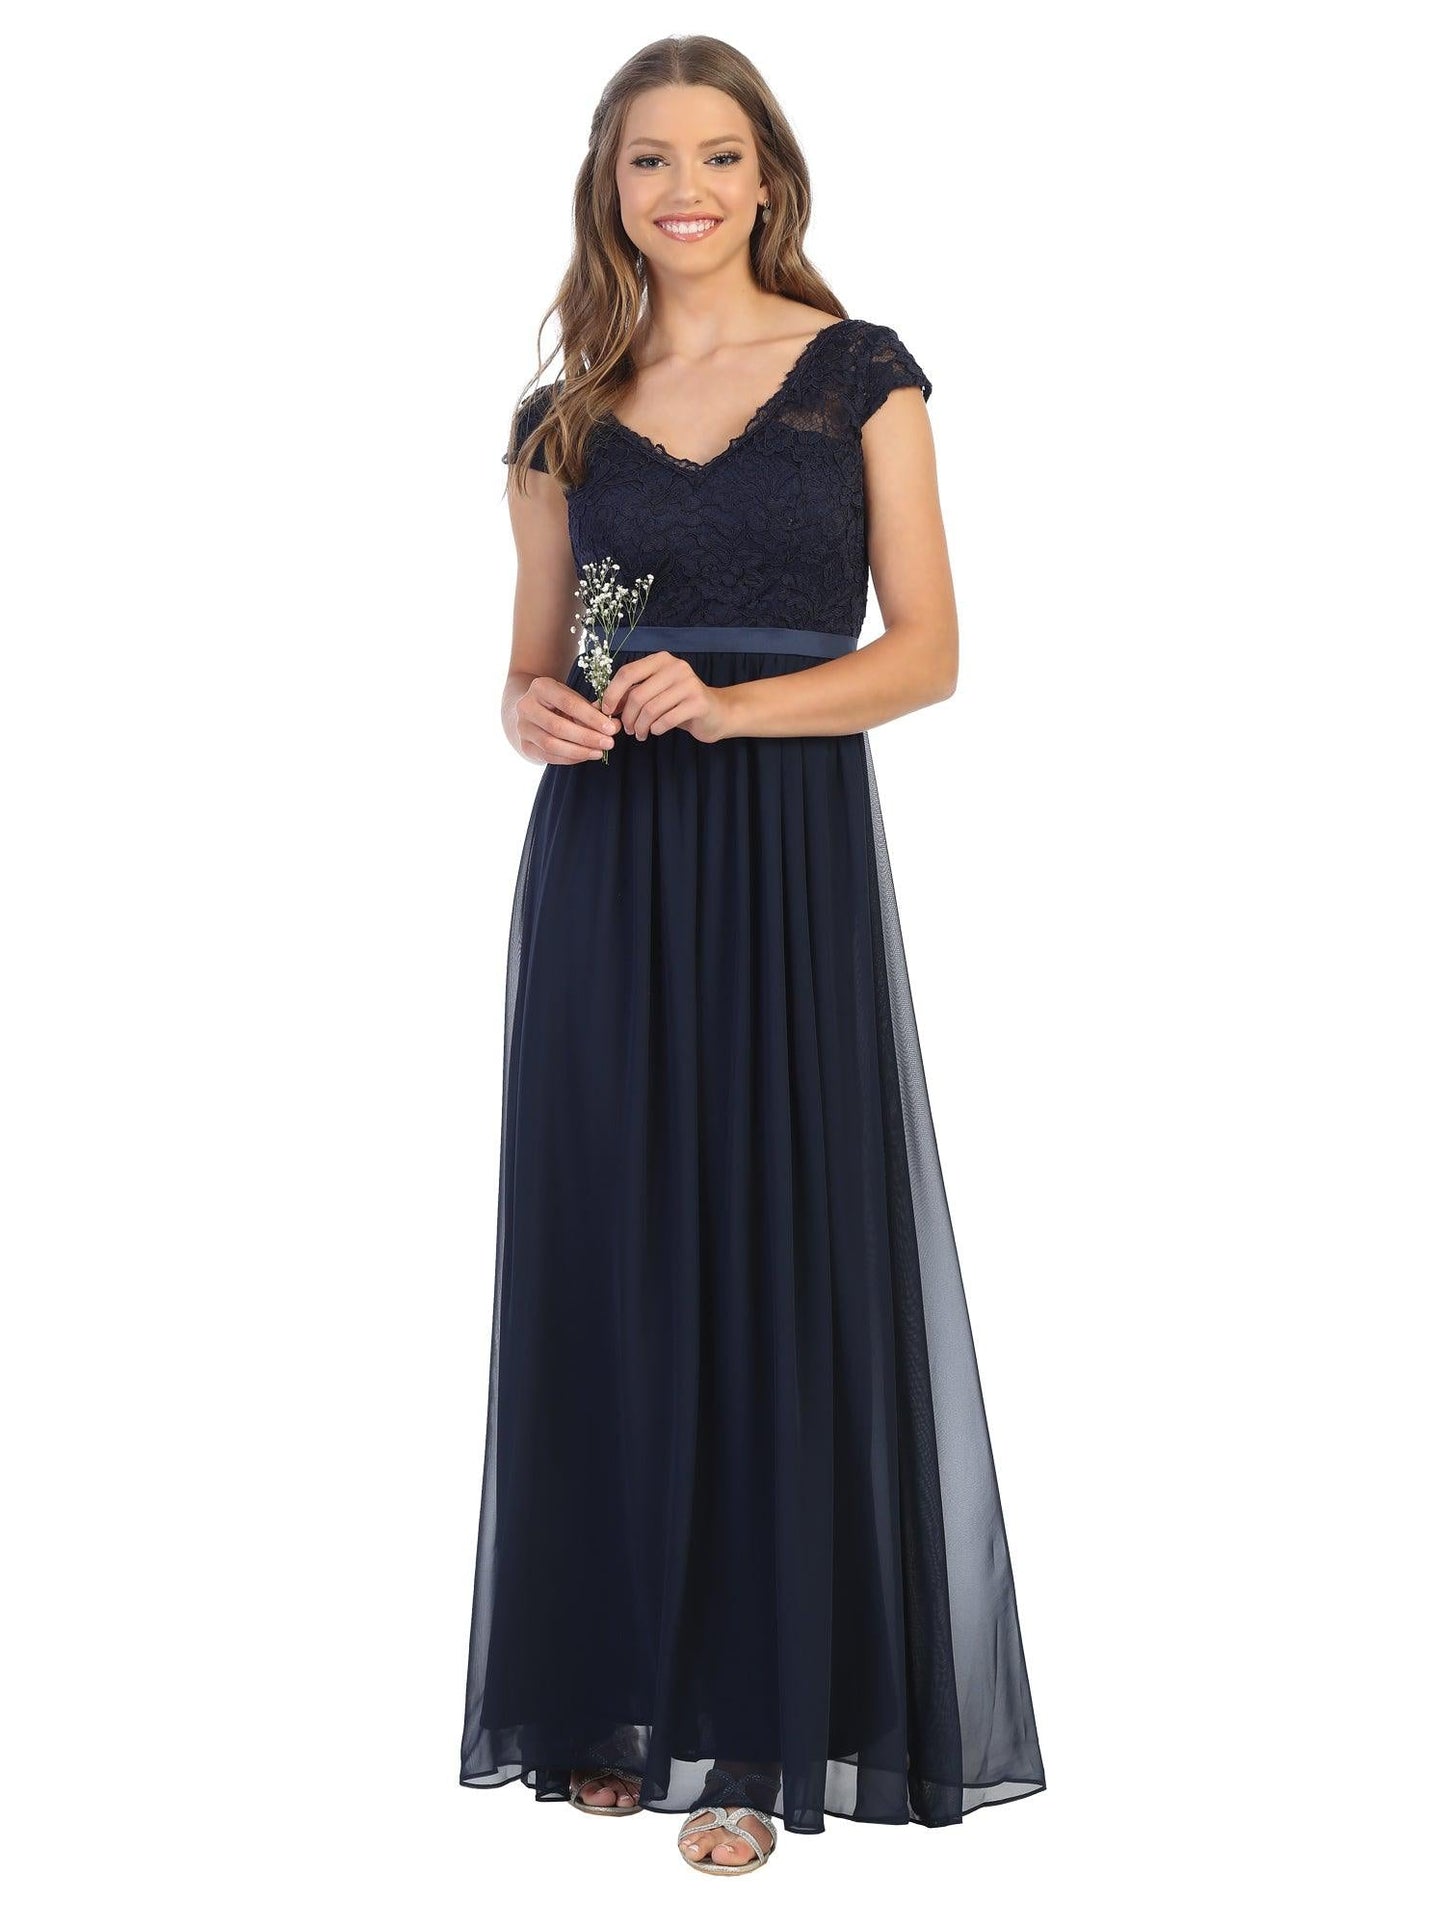 Long Cap Sleeve Mother of the Bride Formal Dress - The Dress Outlet